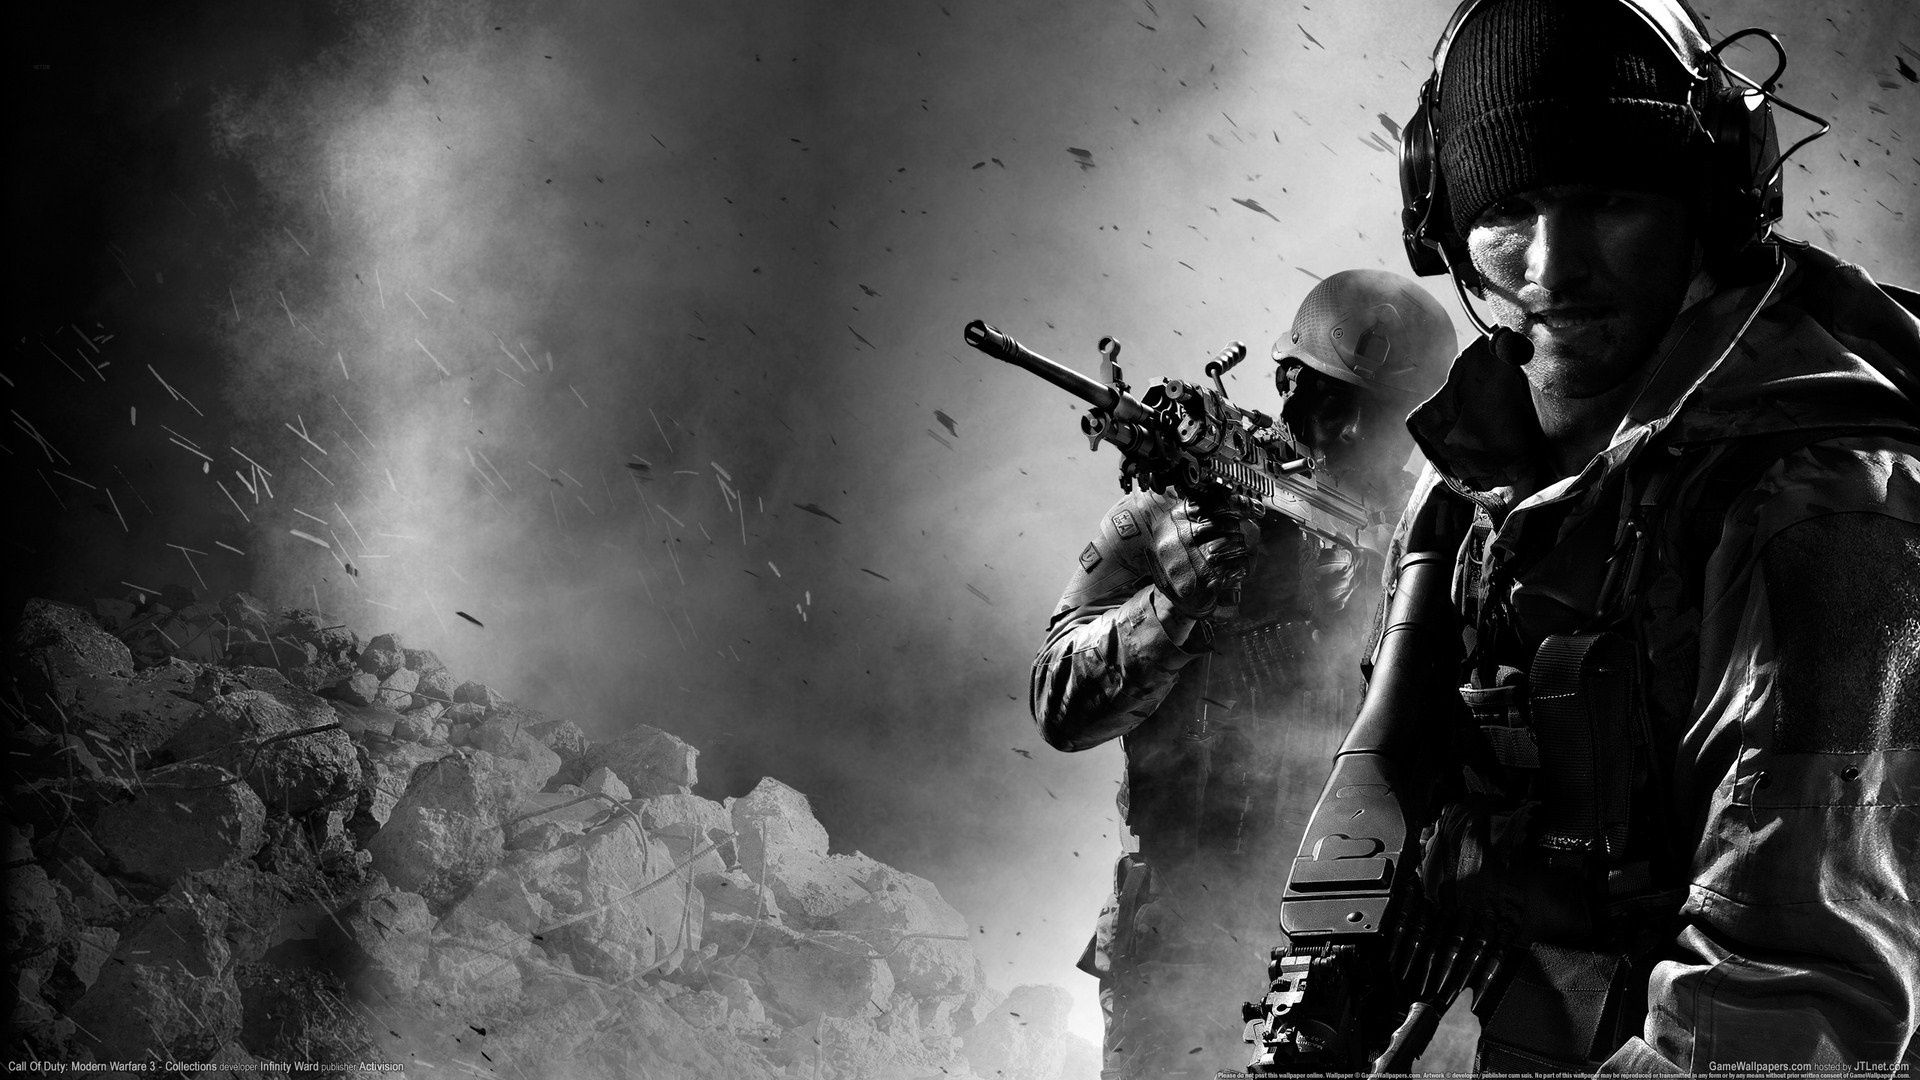 call, Of, Duty, Warrior, Soldier, Weapon, Gun Wallpaper HD / Desktop and Mobile Background